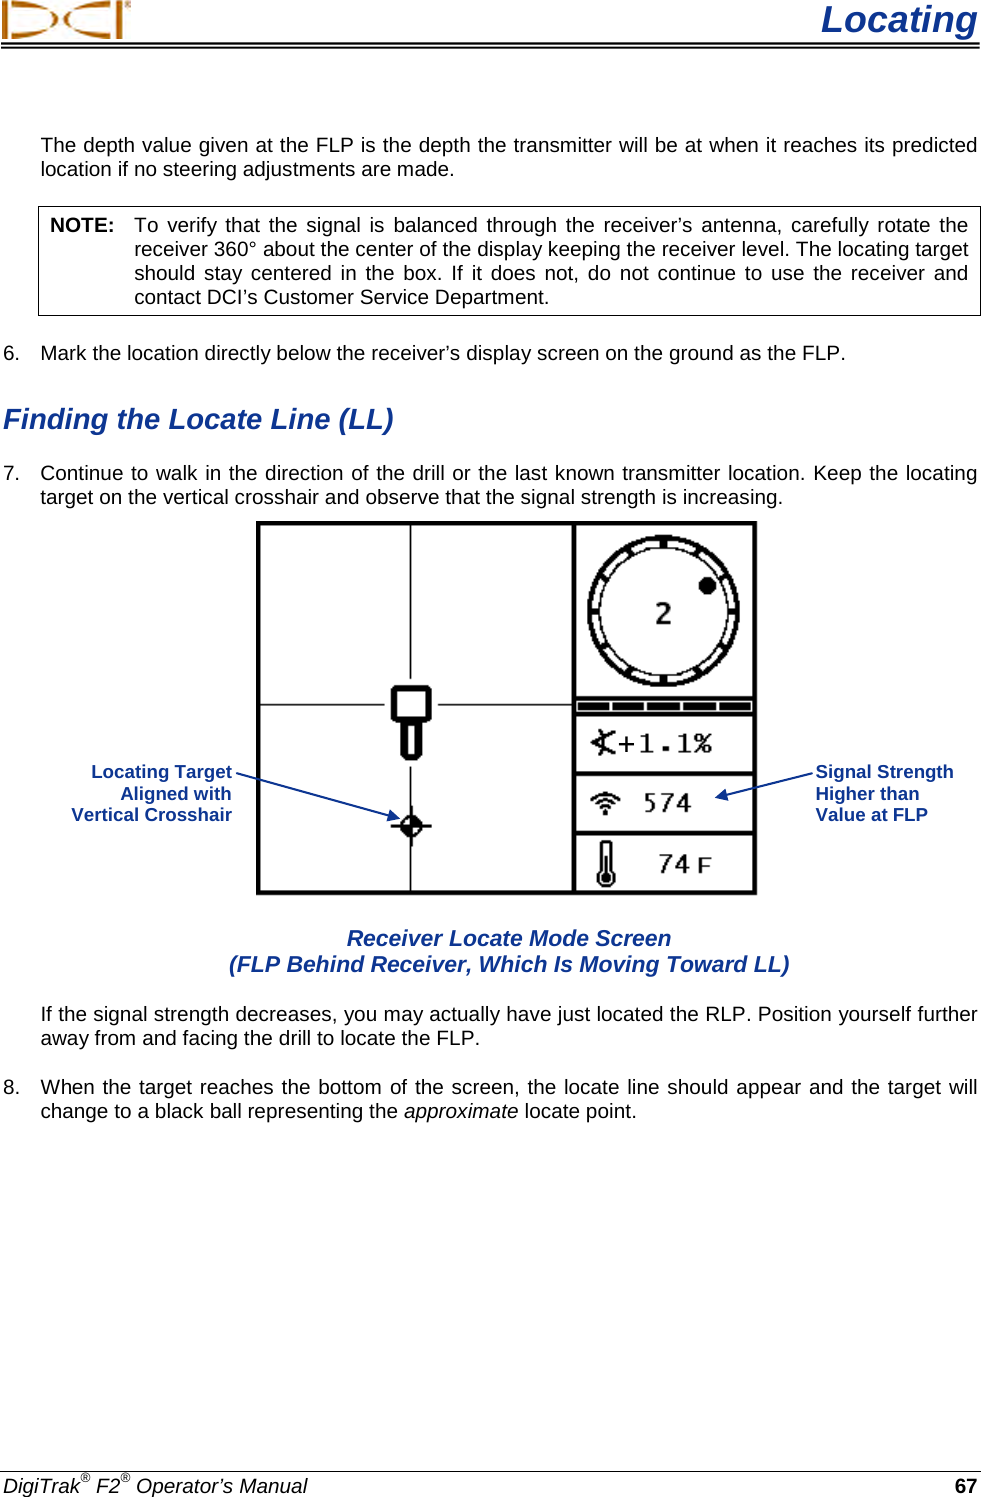  Locating DigiTrak® F2® Operator’s Manual 67 The depth value given at the FLP is the depth the transmitter will be at when it reaches its predicted location if no steering adjustments are made. NOTE: To verify that the signal is balanced through the receiver’s antenna, carefully rotate the receiver 360° about the center of the display keeping the receiver level. The locating target should stay centered in the box. If it does not, do not continue to use the receiver and contact DCI’s Customer Service Department. 6. Mark the location directly below the receiver’s display screen on the ground as the FLP.  Finding the Locate Line (LL) 7. Continue to walk in the direction of the drill or the last known transmitter location. Keep the locating target on the vertical crosshair and observe that the signal strength is increasing.   Receiver Locate Mode Screen (FLP Behind Receiver, Which Is Moving Toward LL) If the signal strength decreases, you may actually have just located the RLP. Position yourself further away from and facing the drill to locate the FLP. 8. When the target reaches the bottom of the screen, the locate line should appear and the target will change to a black ball representing the approximate locate point.  Signal Strength Higher than Value at FLP Locating Target  Aligned with  Vertical Crosshair  + 